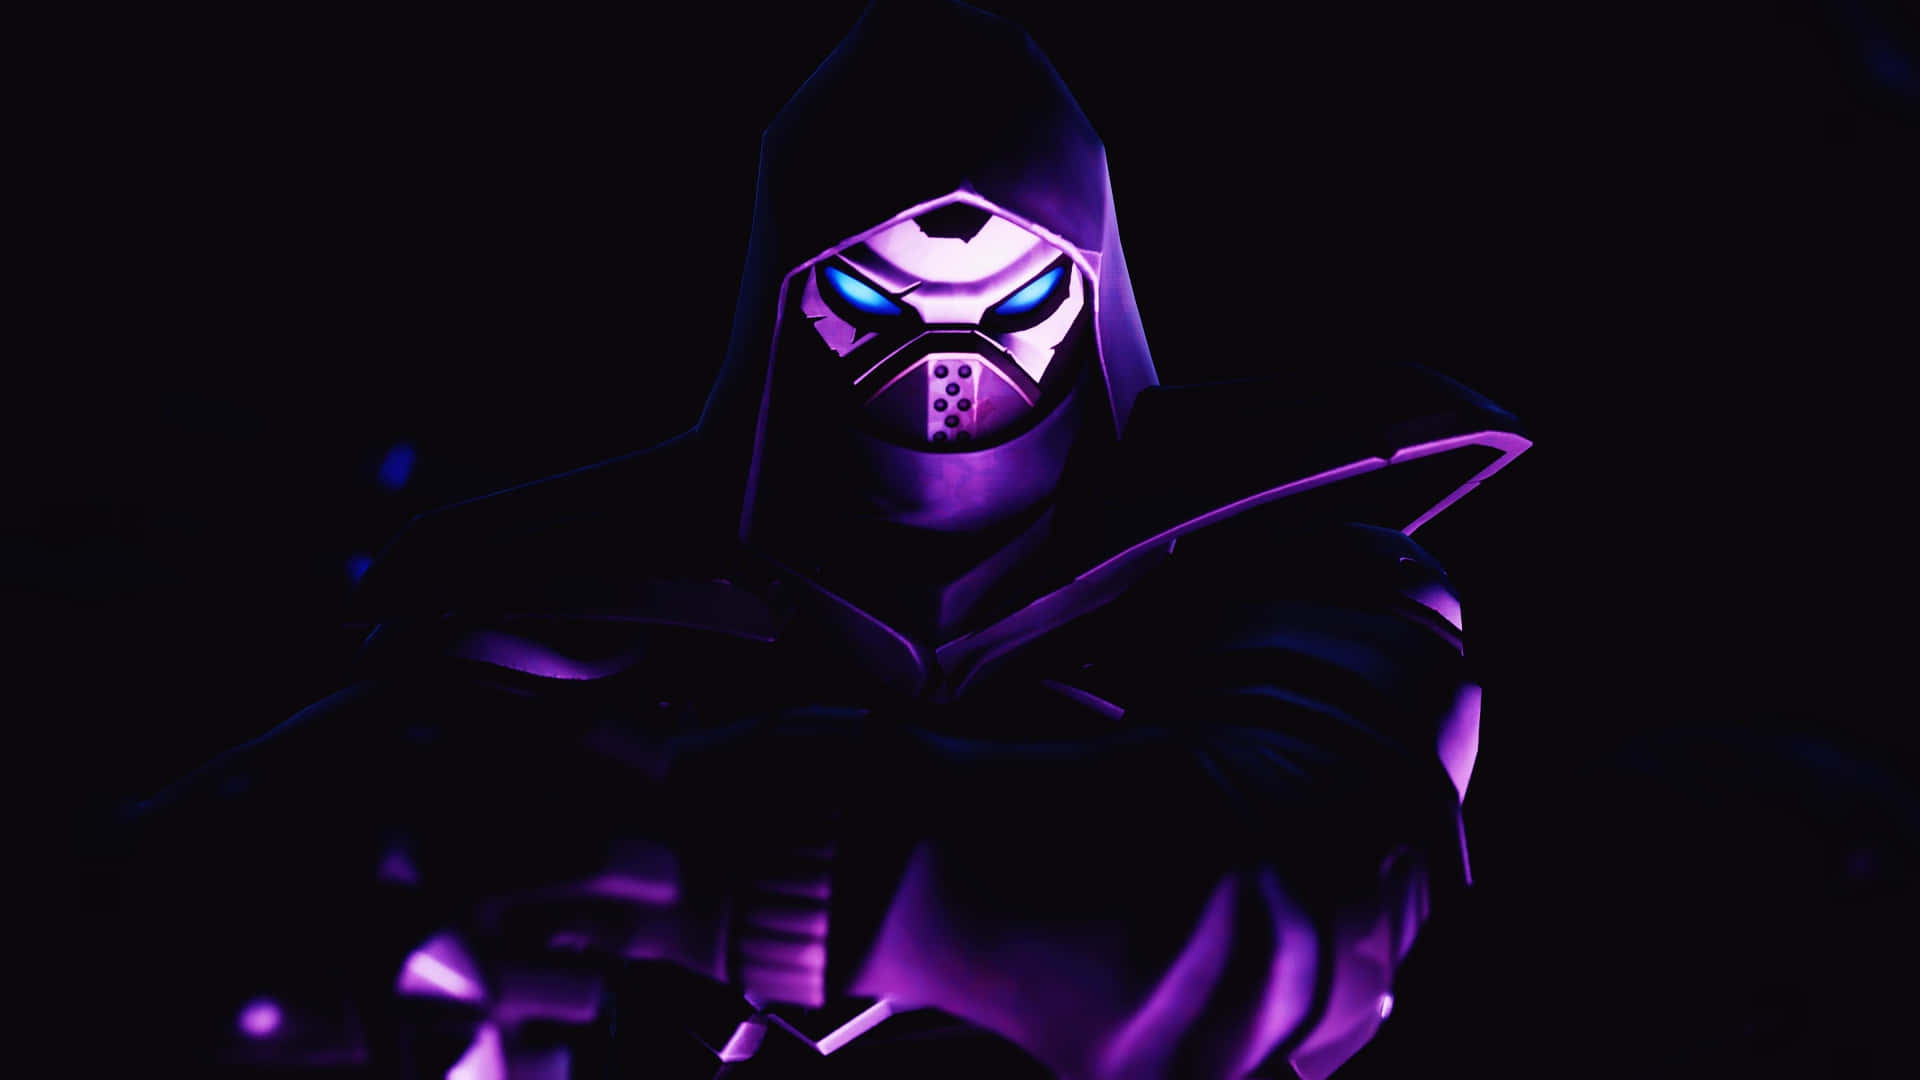 A view of the Raven skin from Fortnite Wallpaper